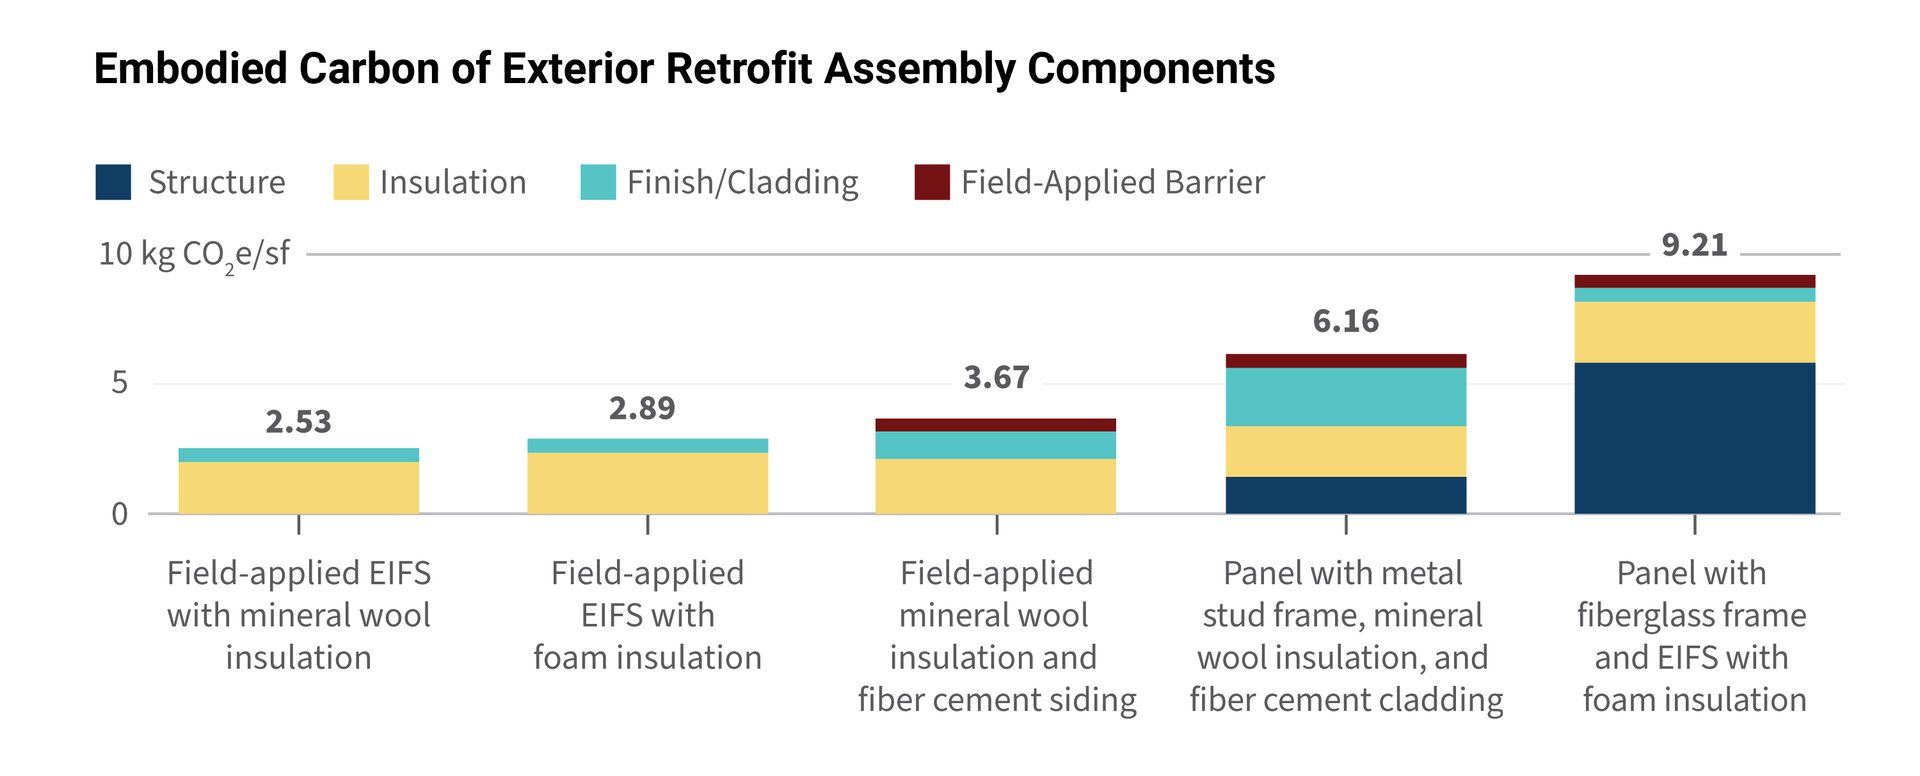 Embodied Carbon of Exterior Retrofit Assembly Components